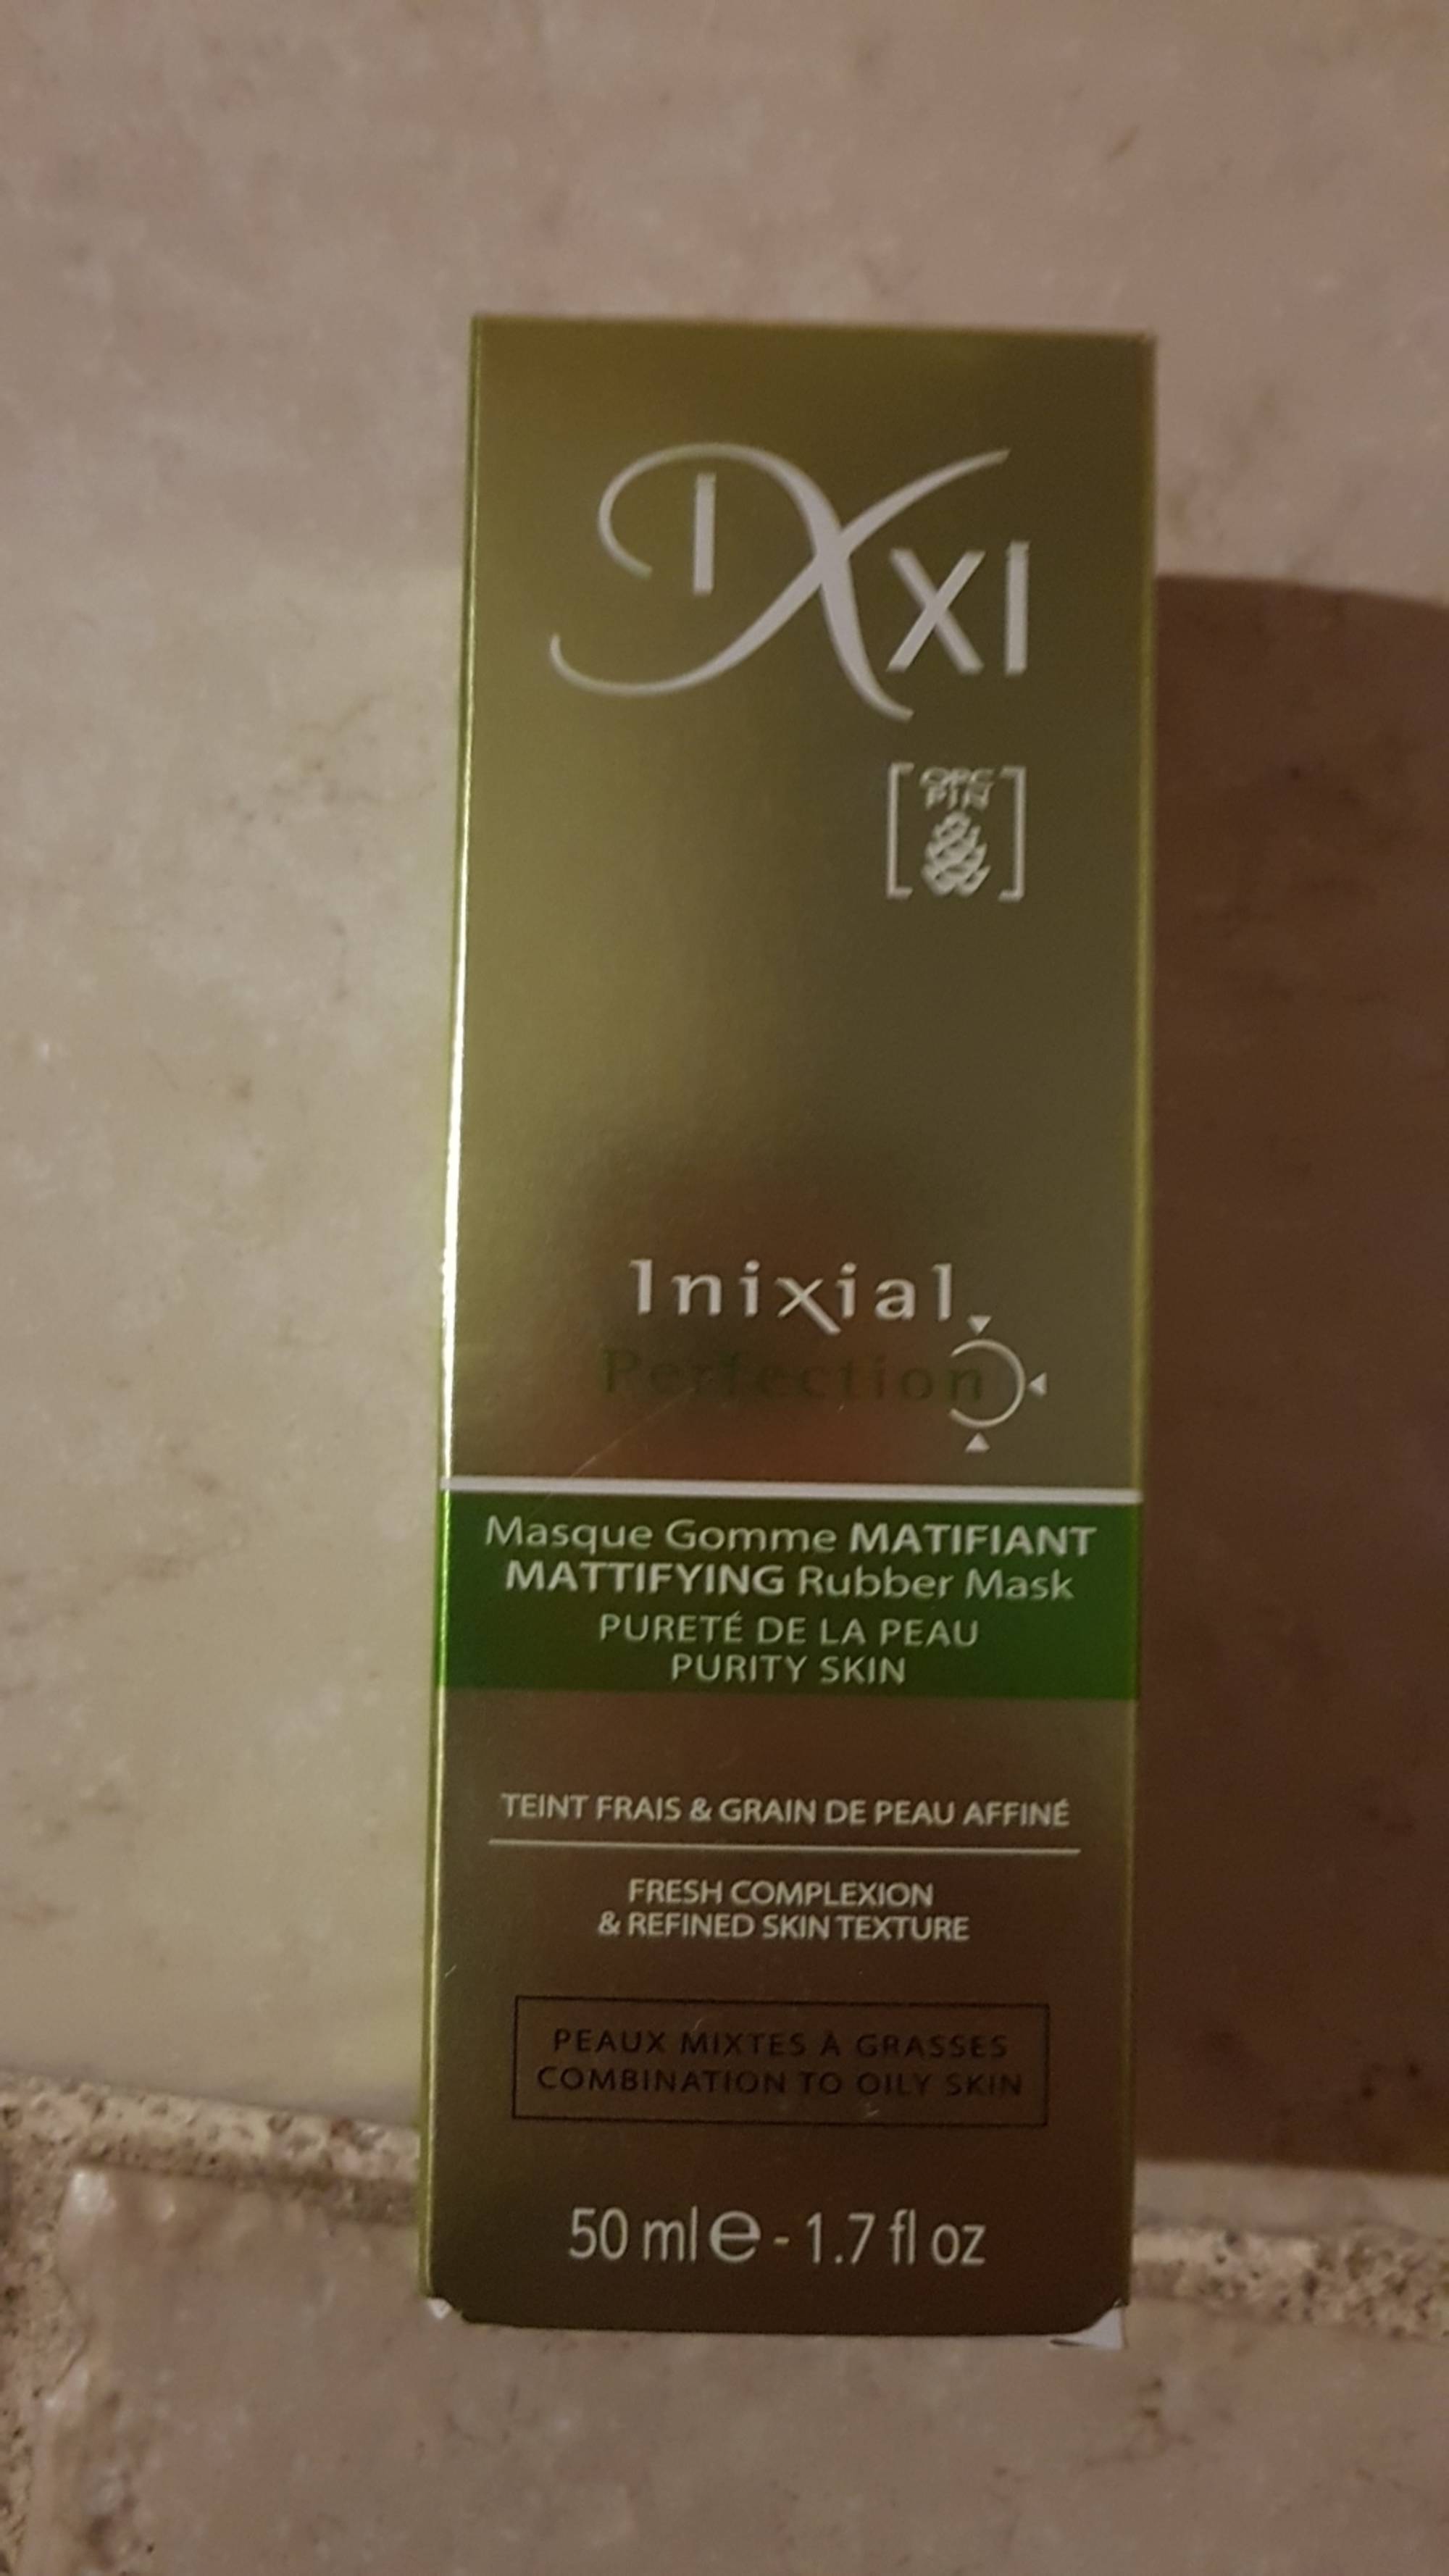 IXXI - Inixial perfection - Masque gomme matifiant